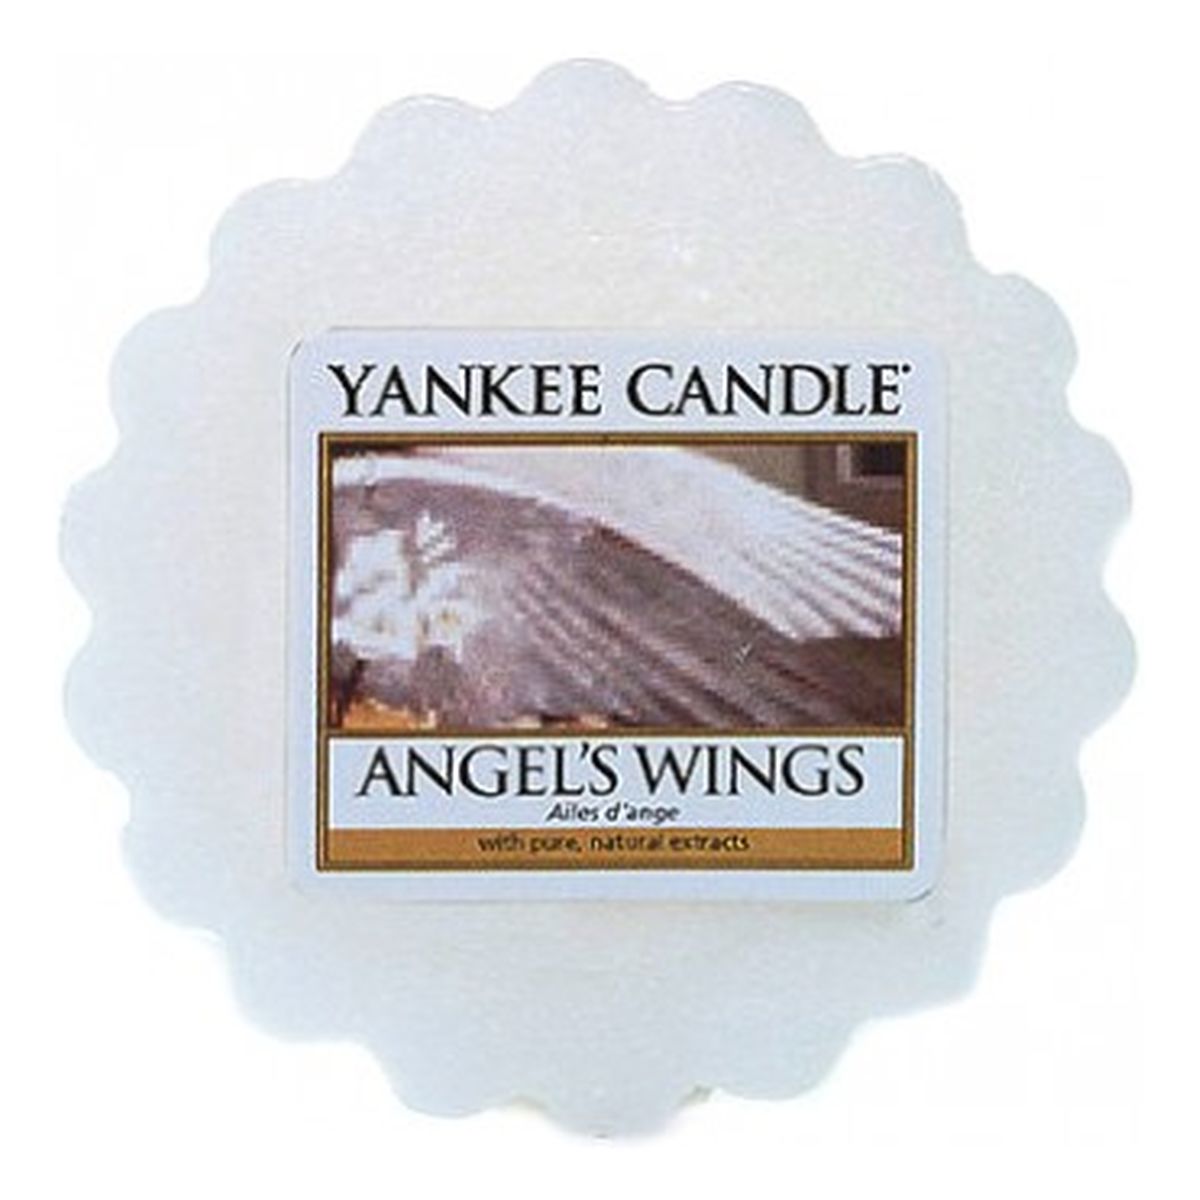 Yankee Candle Wax Zapachowy Wosk Angel's Wings 22g